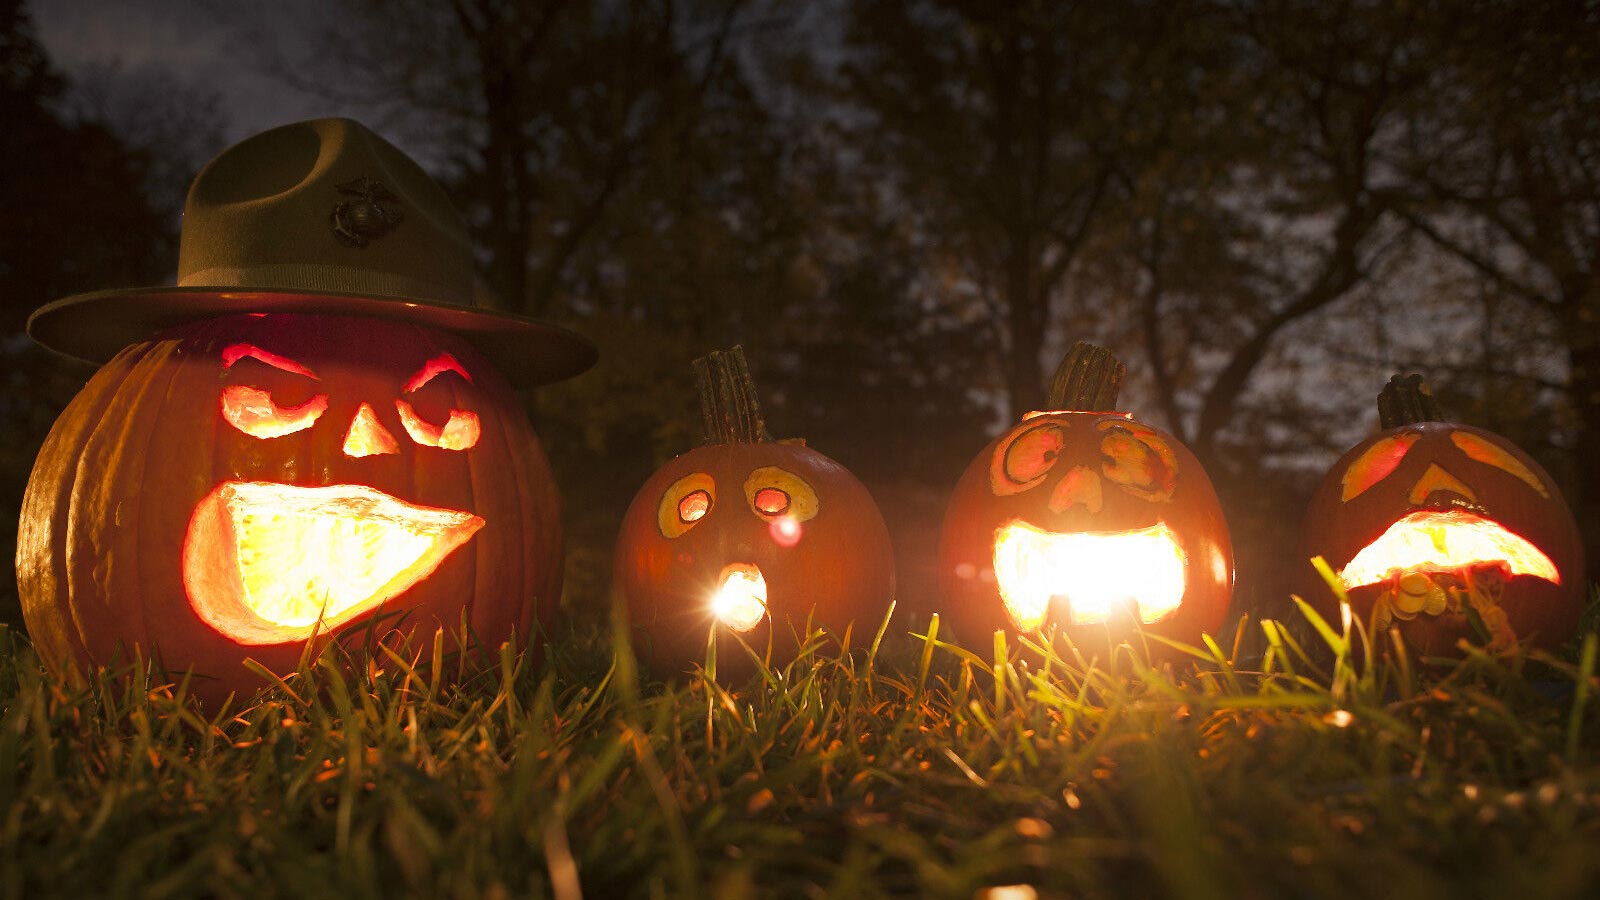 Four carved halloween pumpkins with lit candles